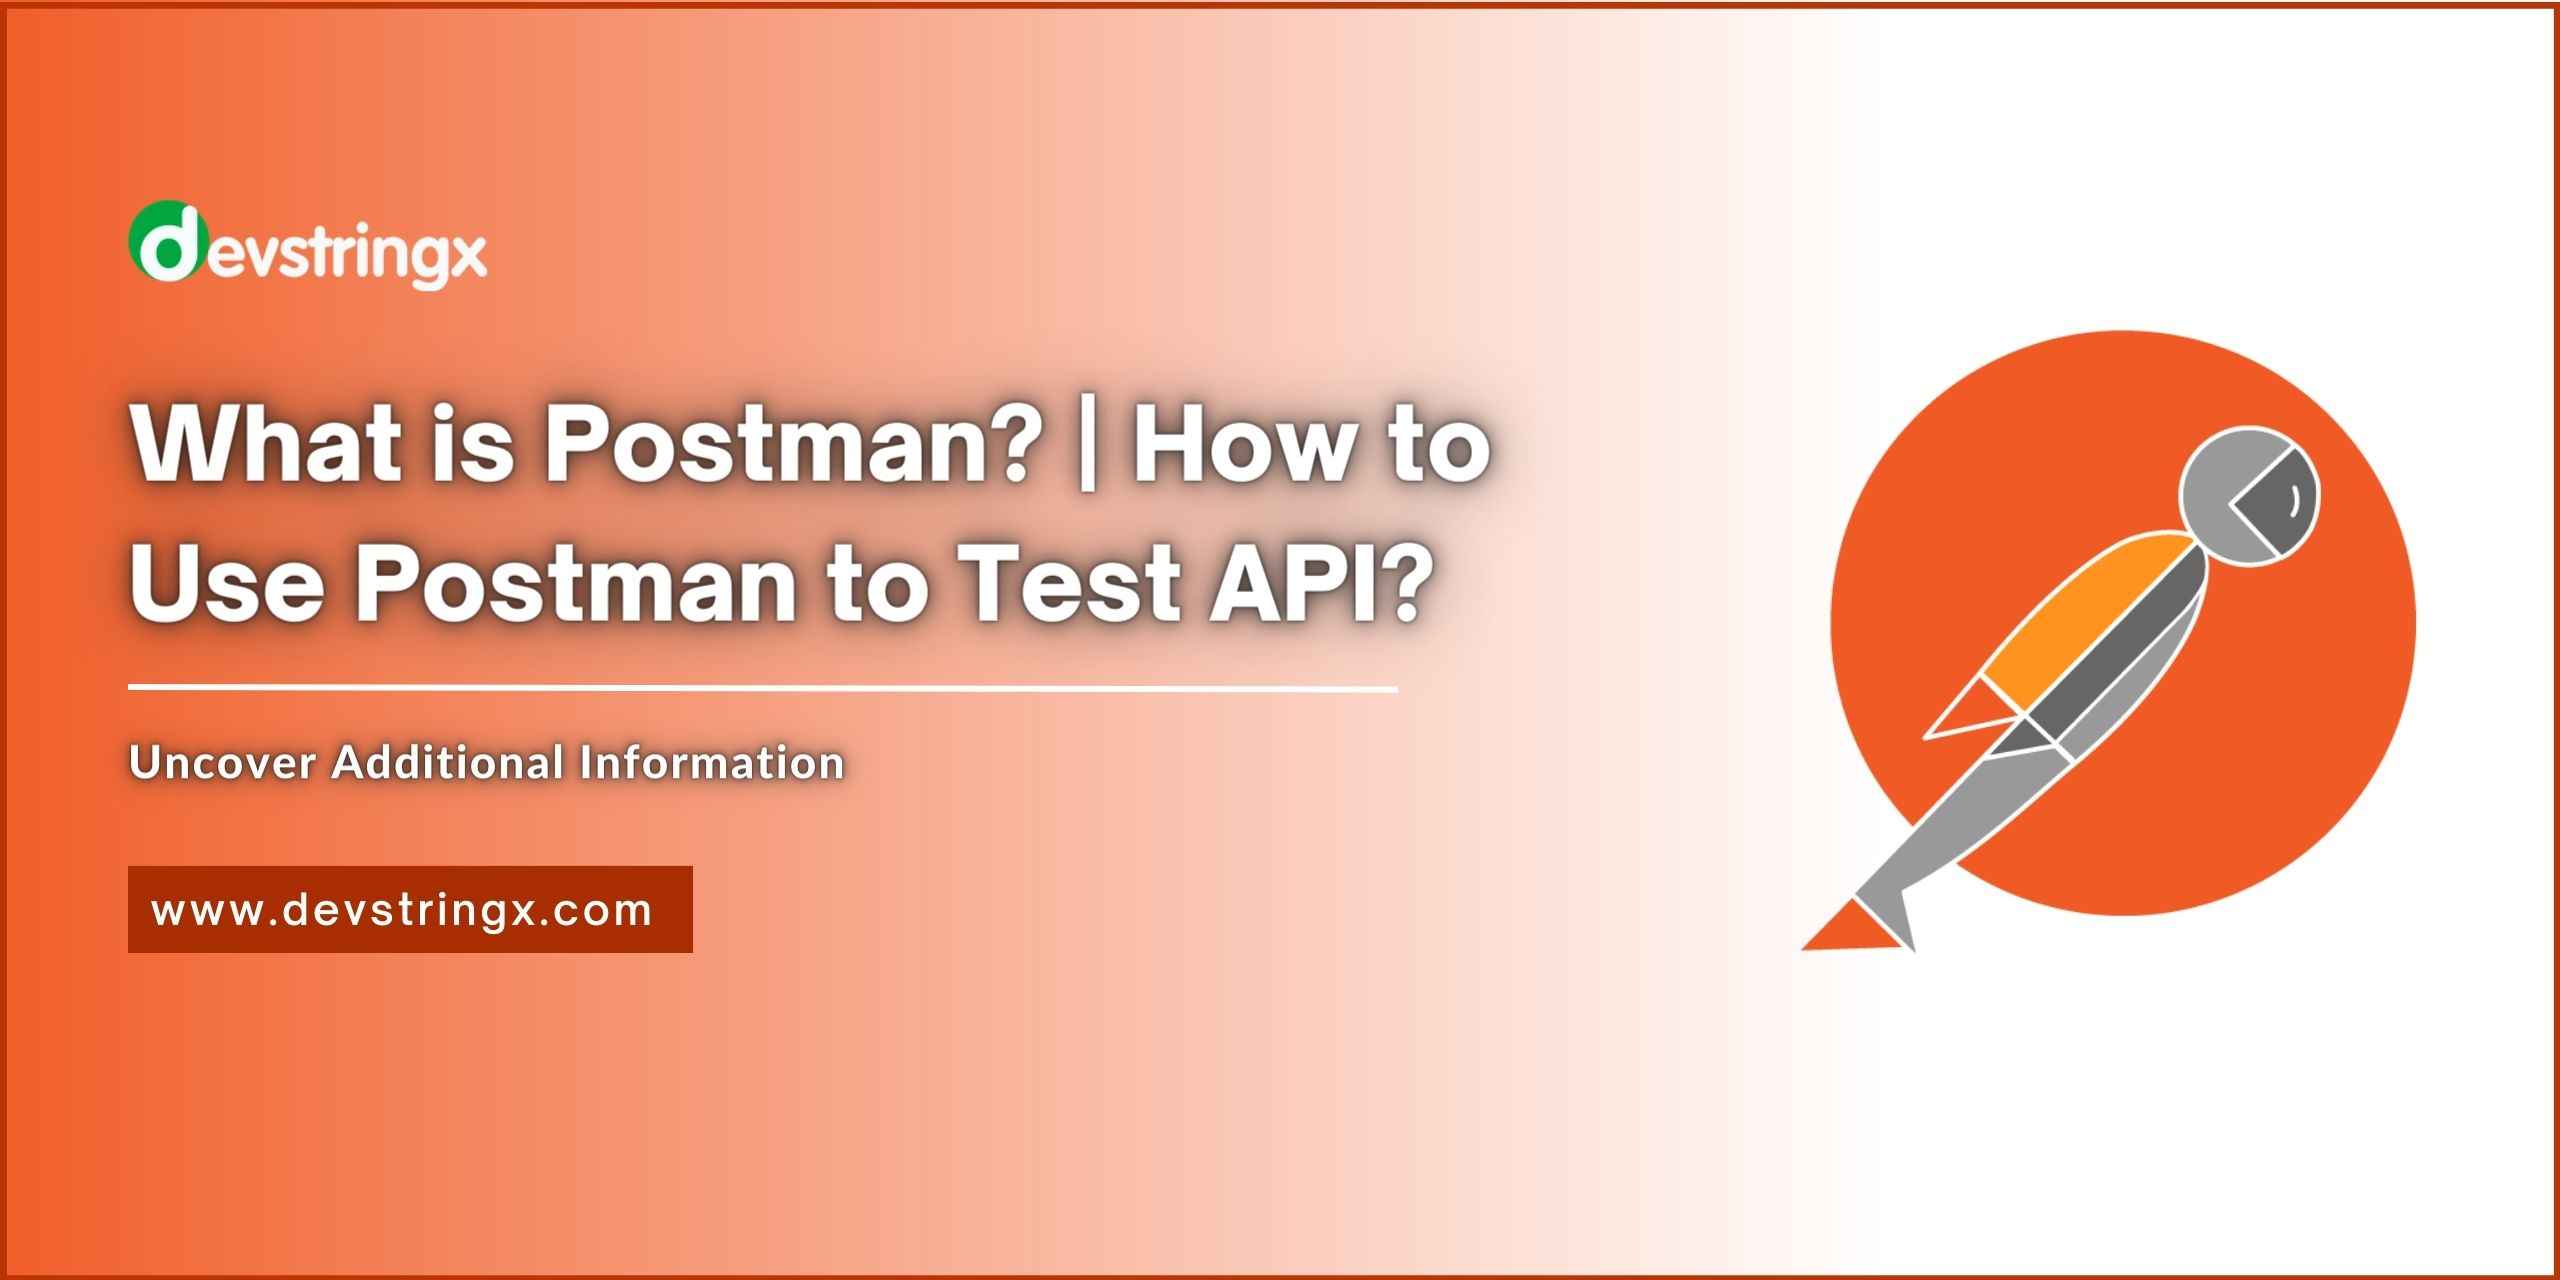 Feature image for Postman API test